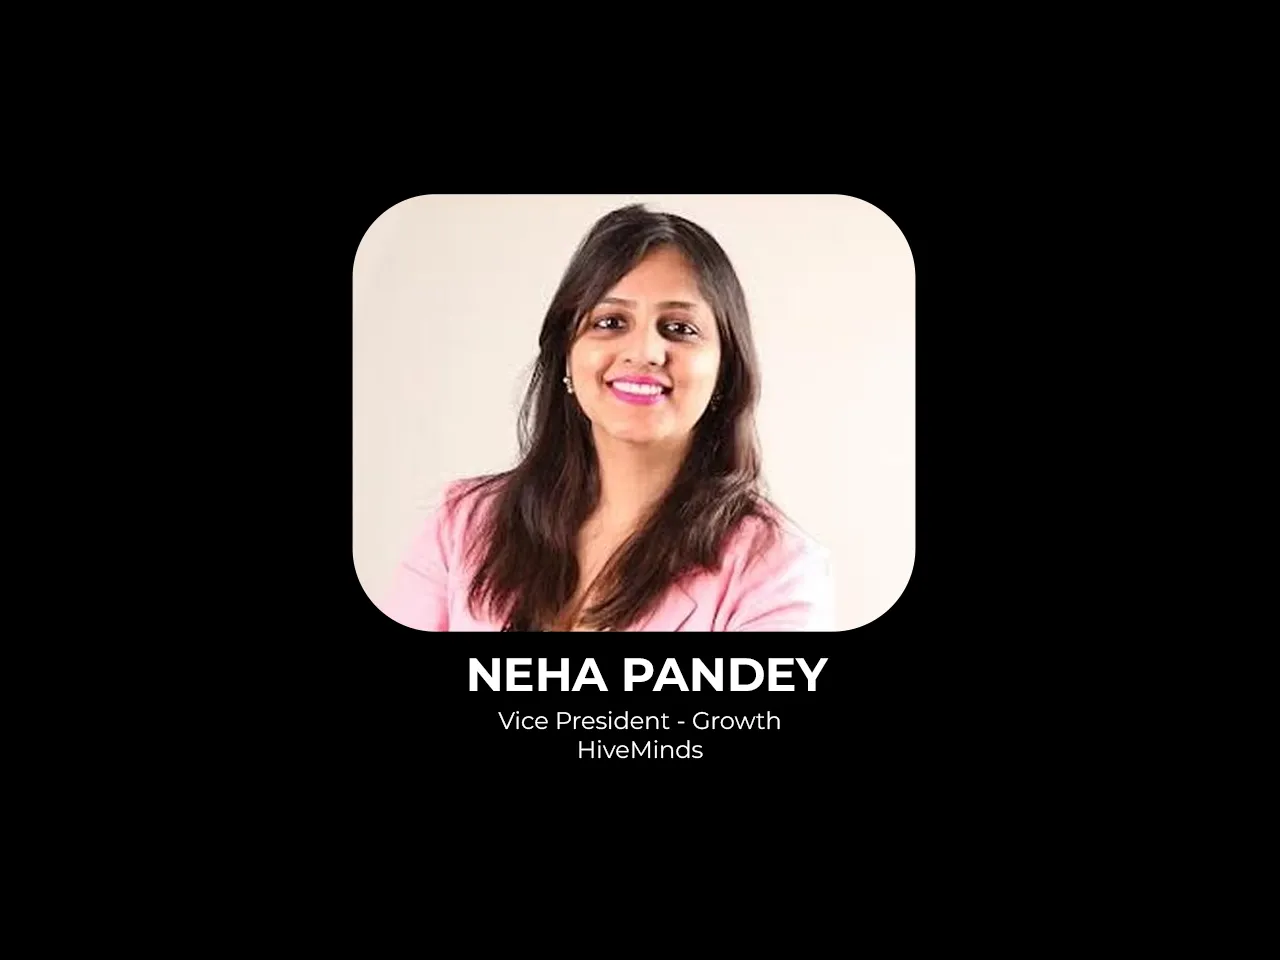 HiveMinds appoints Neha Pandey as Vice President of Growth